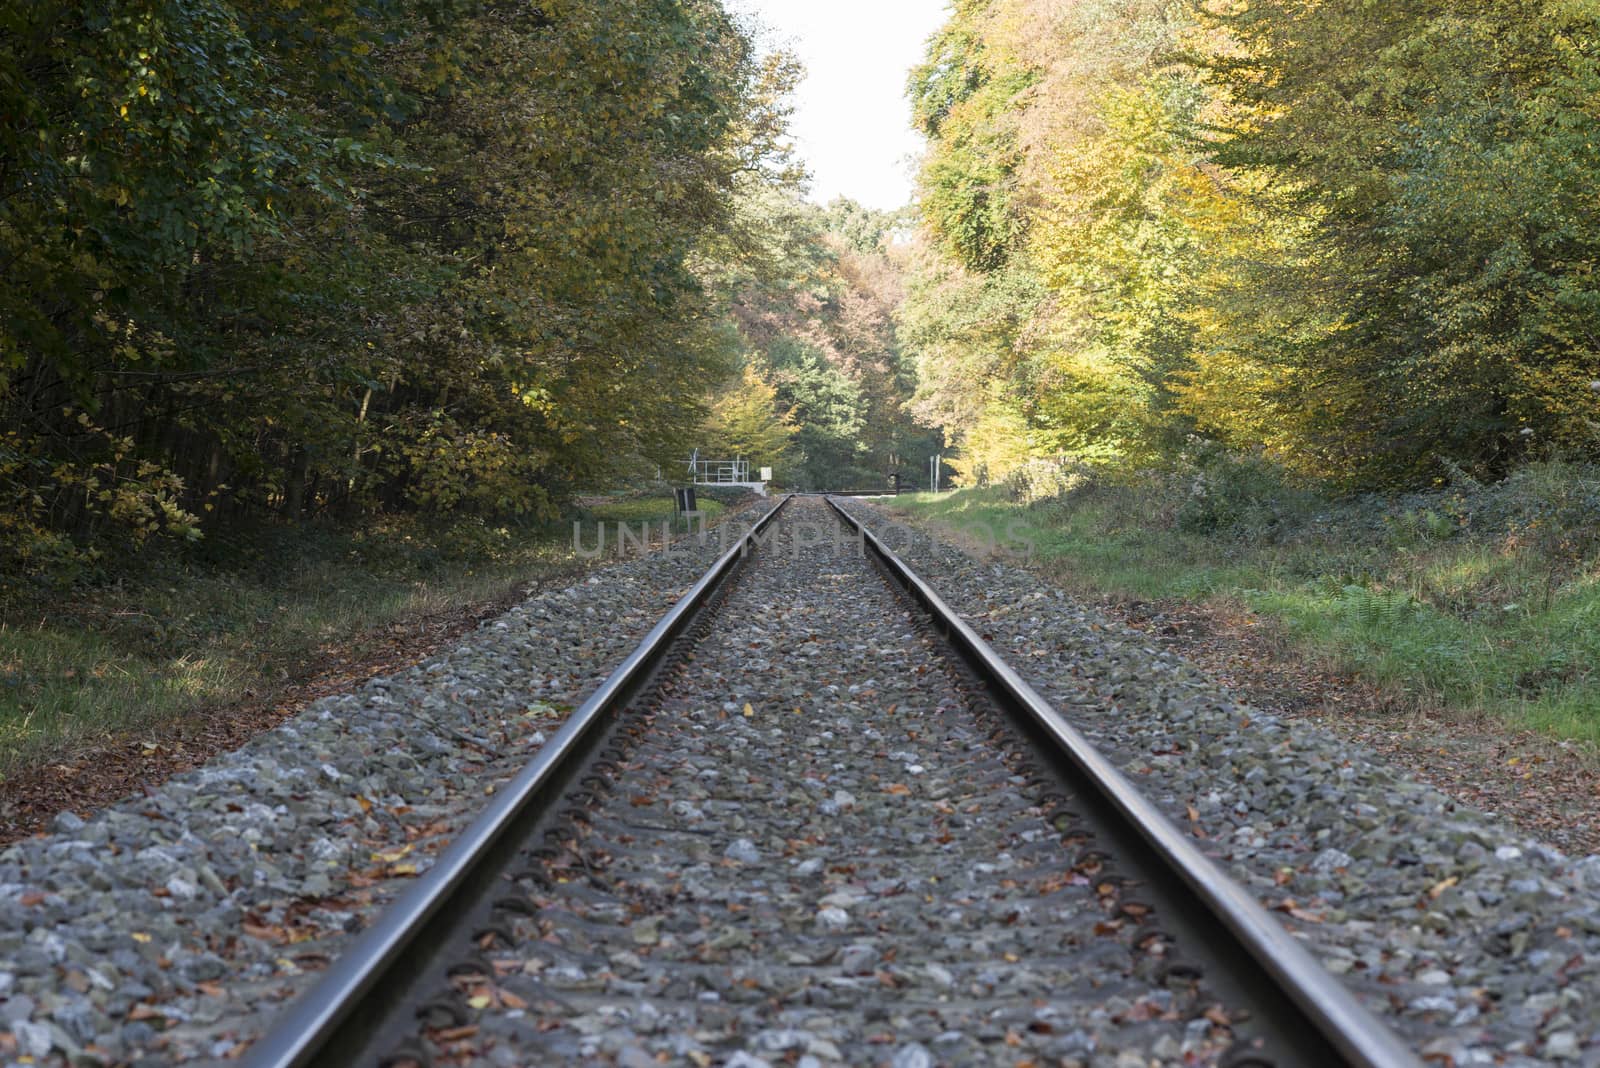 railroad track in autumn forest